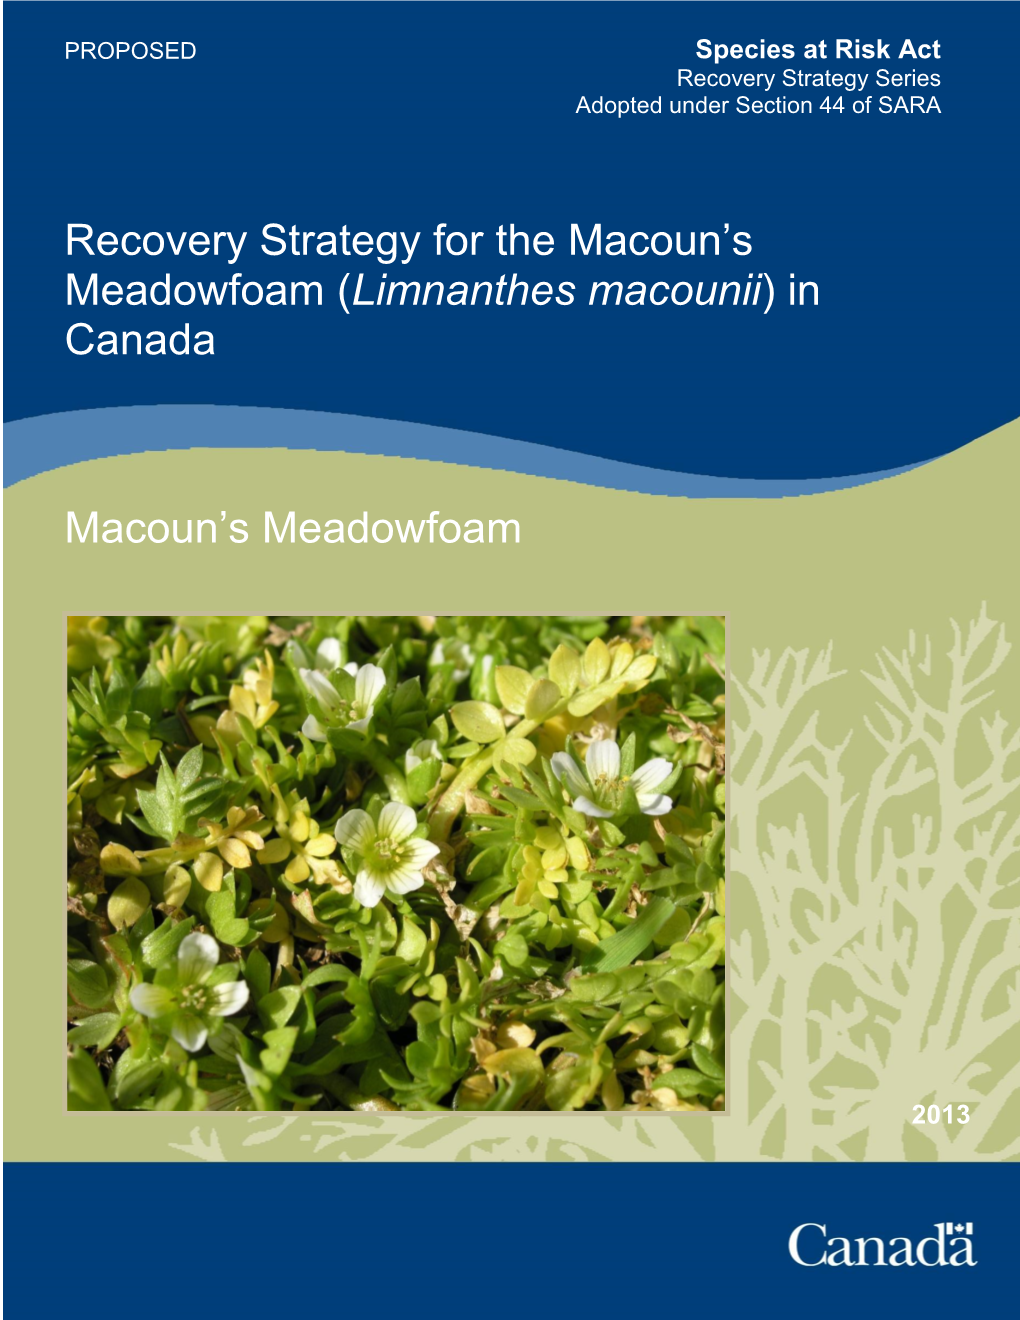 Recovery Strategy for the Macoun's Meadowfoam (Limnanthes Macounii)